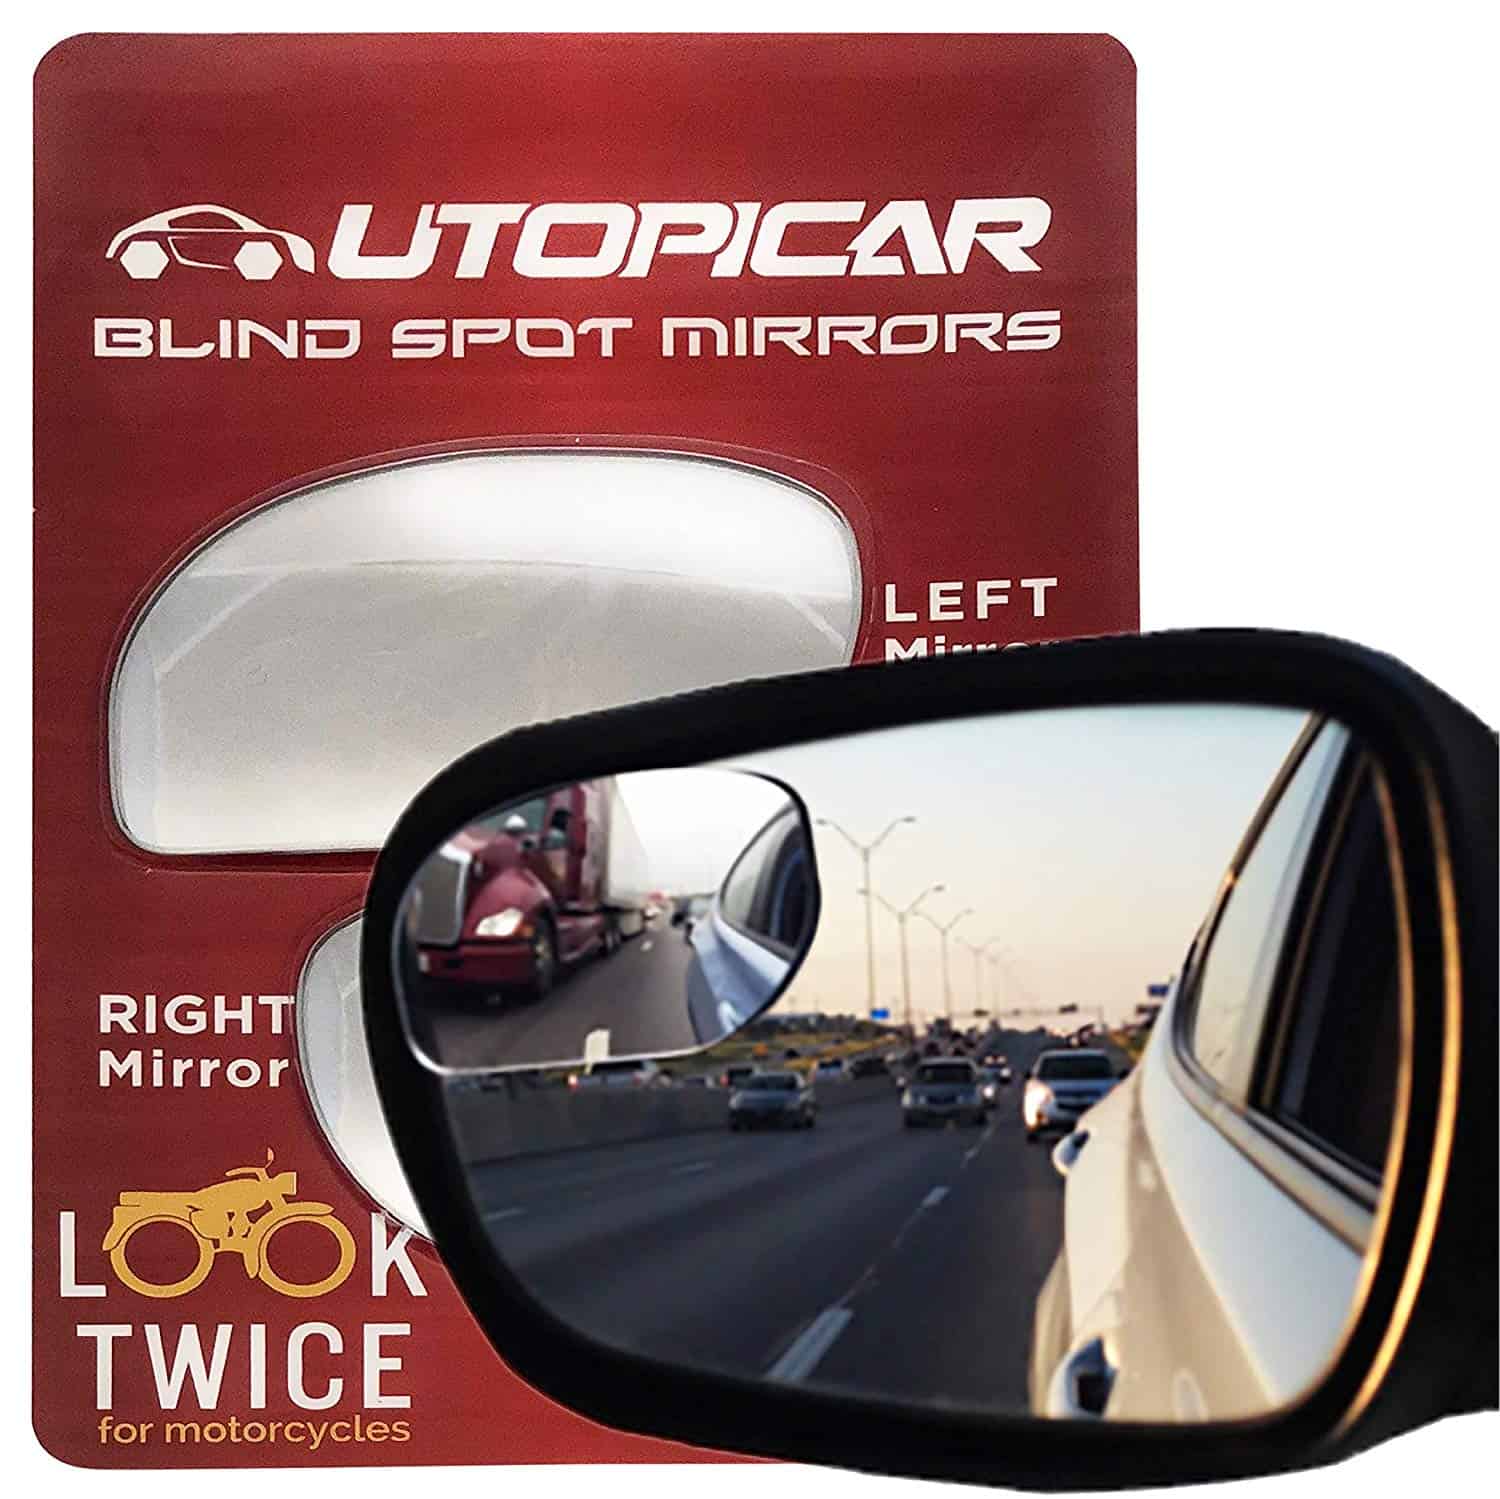 Best Blind Spot Mirrors In 2020 Autowise, Motorcycle Blind Spot Mirror Reviews